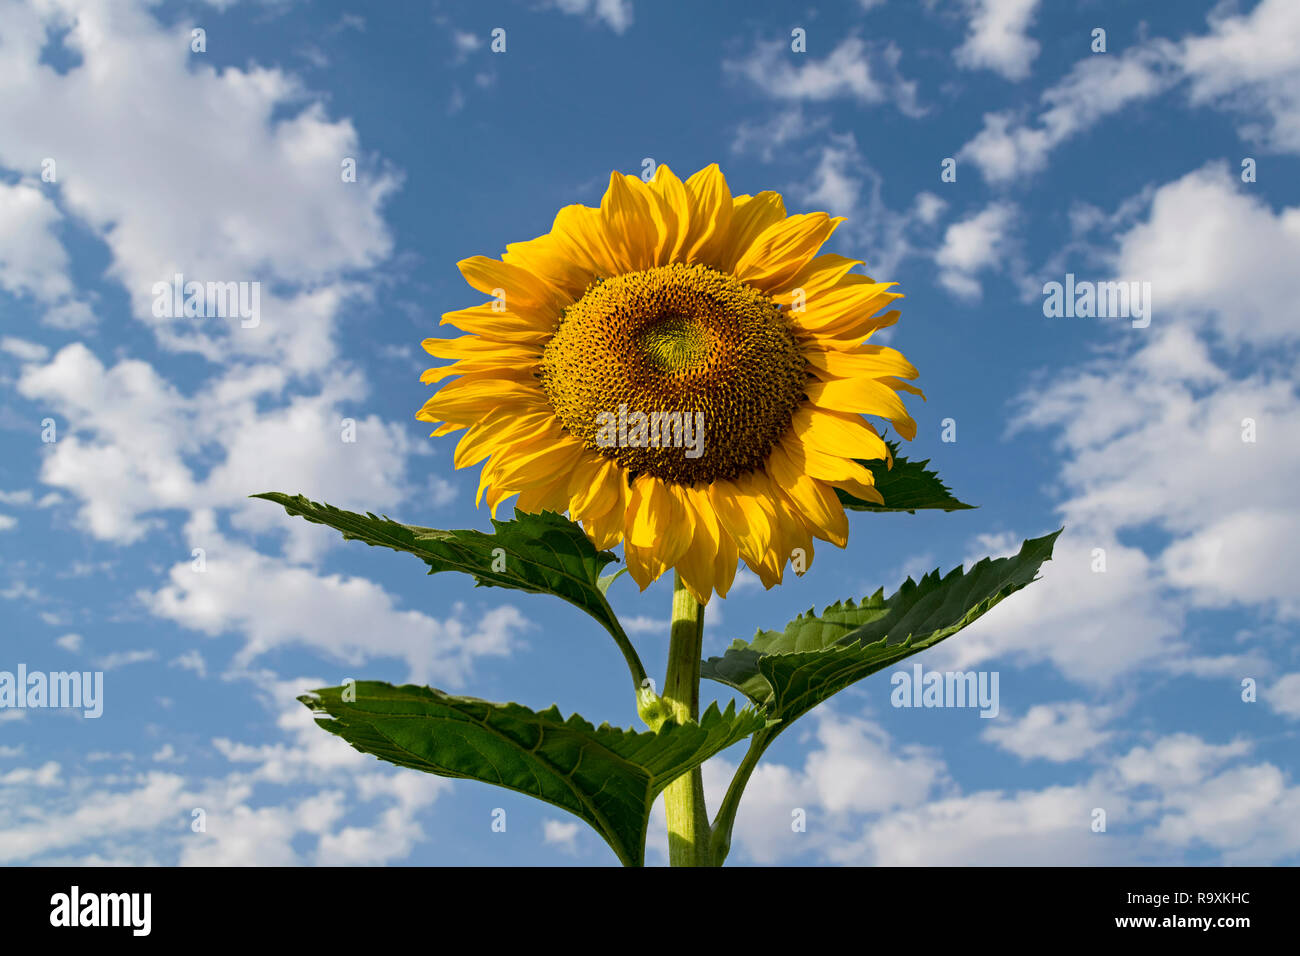 a giant golden yellow sunflower and leaves from a low angle with a blue sky and fluffy clouds in the background Stock Photo